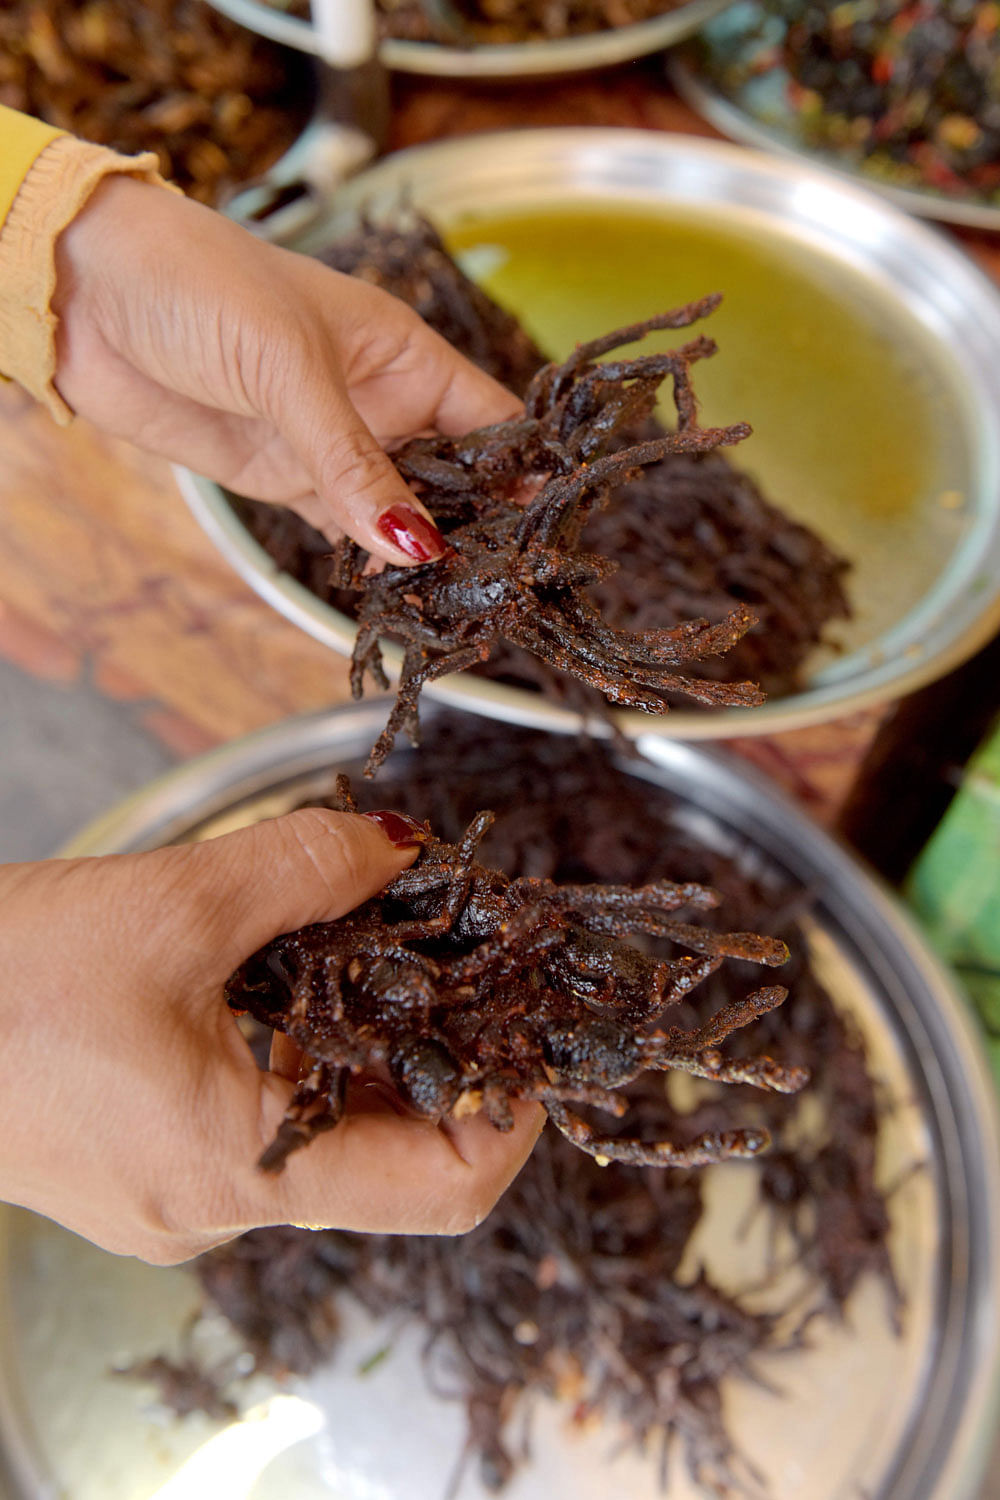 This photo taken on 14 March 2018 shows a Cambodian vendor preparing fried tarantulas for sale at Skun town in Kampong Cham province. While a plate piled high with hairy, palm-sized tarantulas is the stuff of nightmares for some, these garlic fried spiders are a coveted treat in Cambodia, where the only fear is that they may soon vanish due to deforestation and unchecked hunting. Photo: AFP